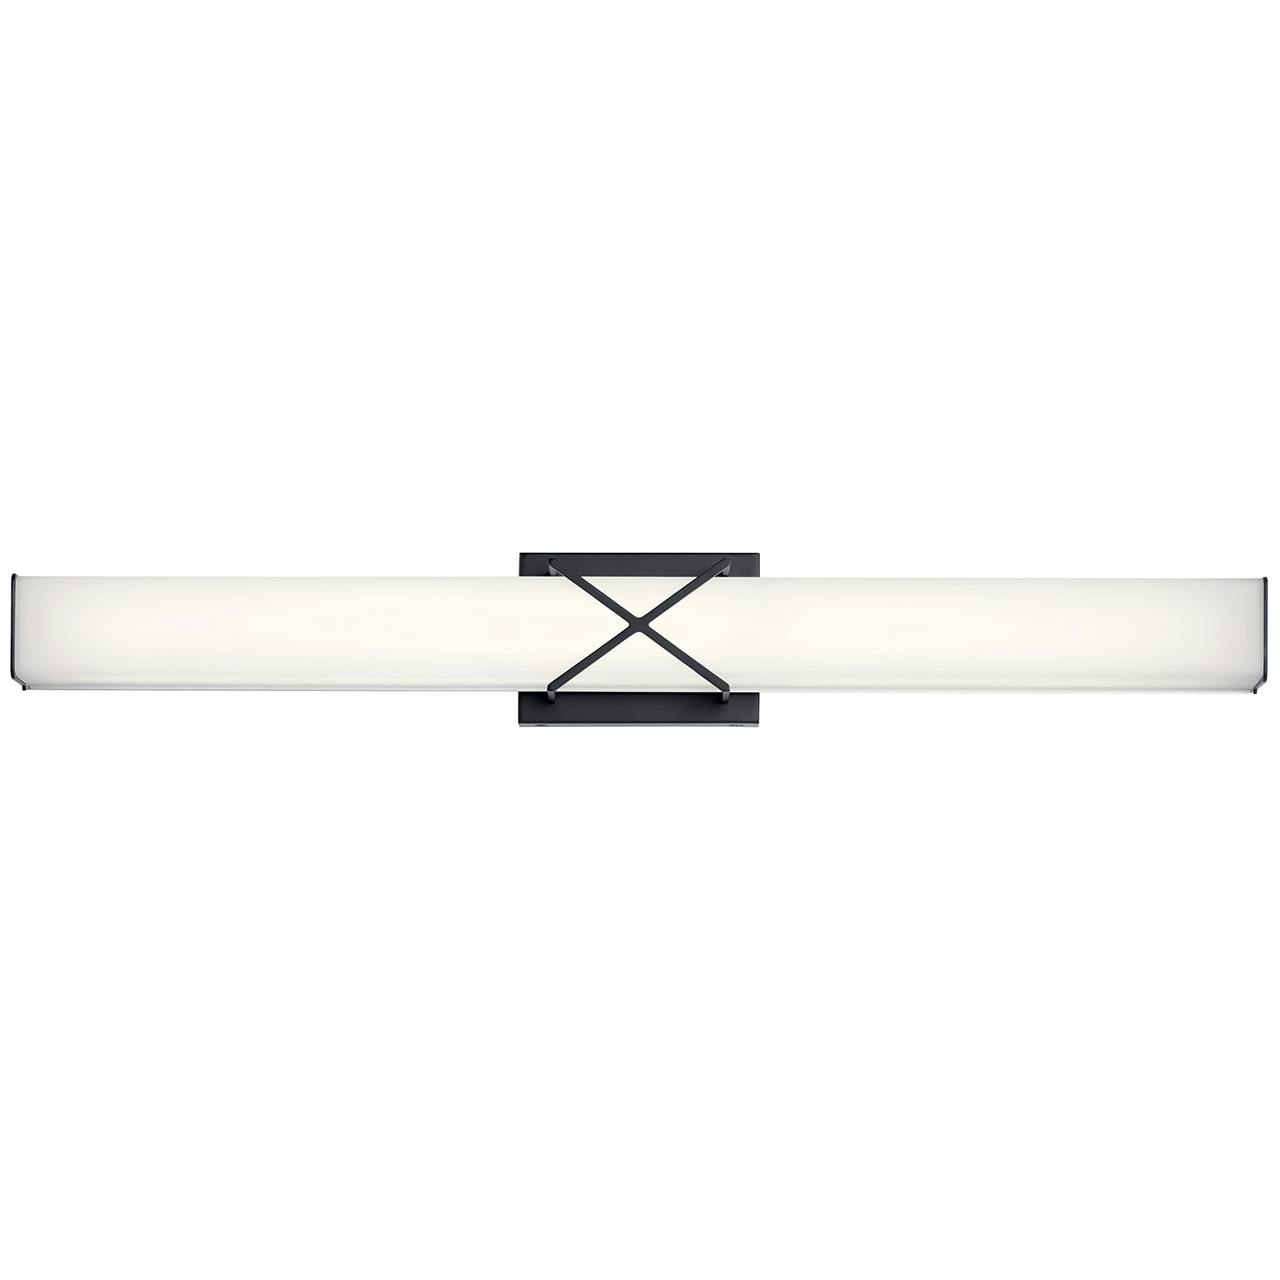 Product image of the 45658MBKLED shown hung horizontally